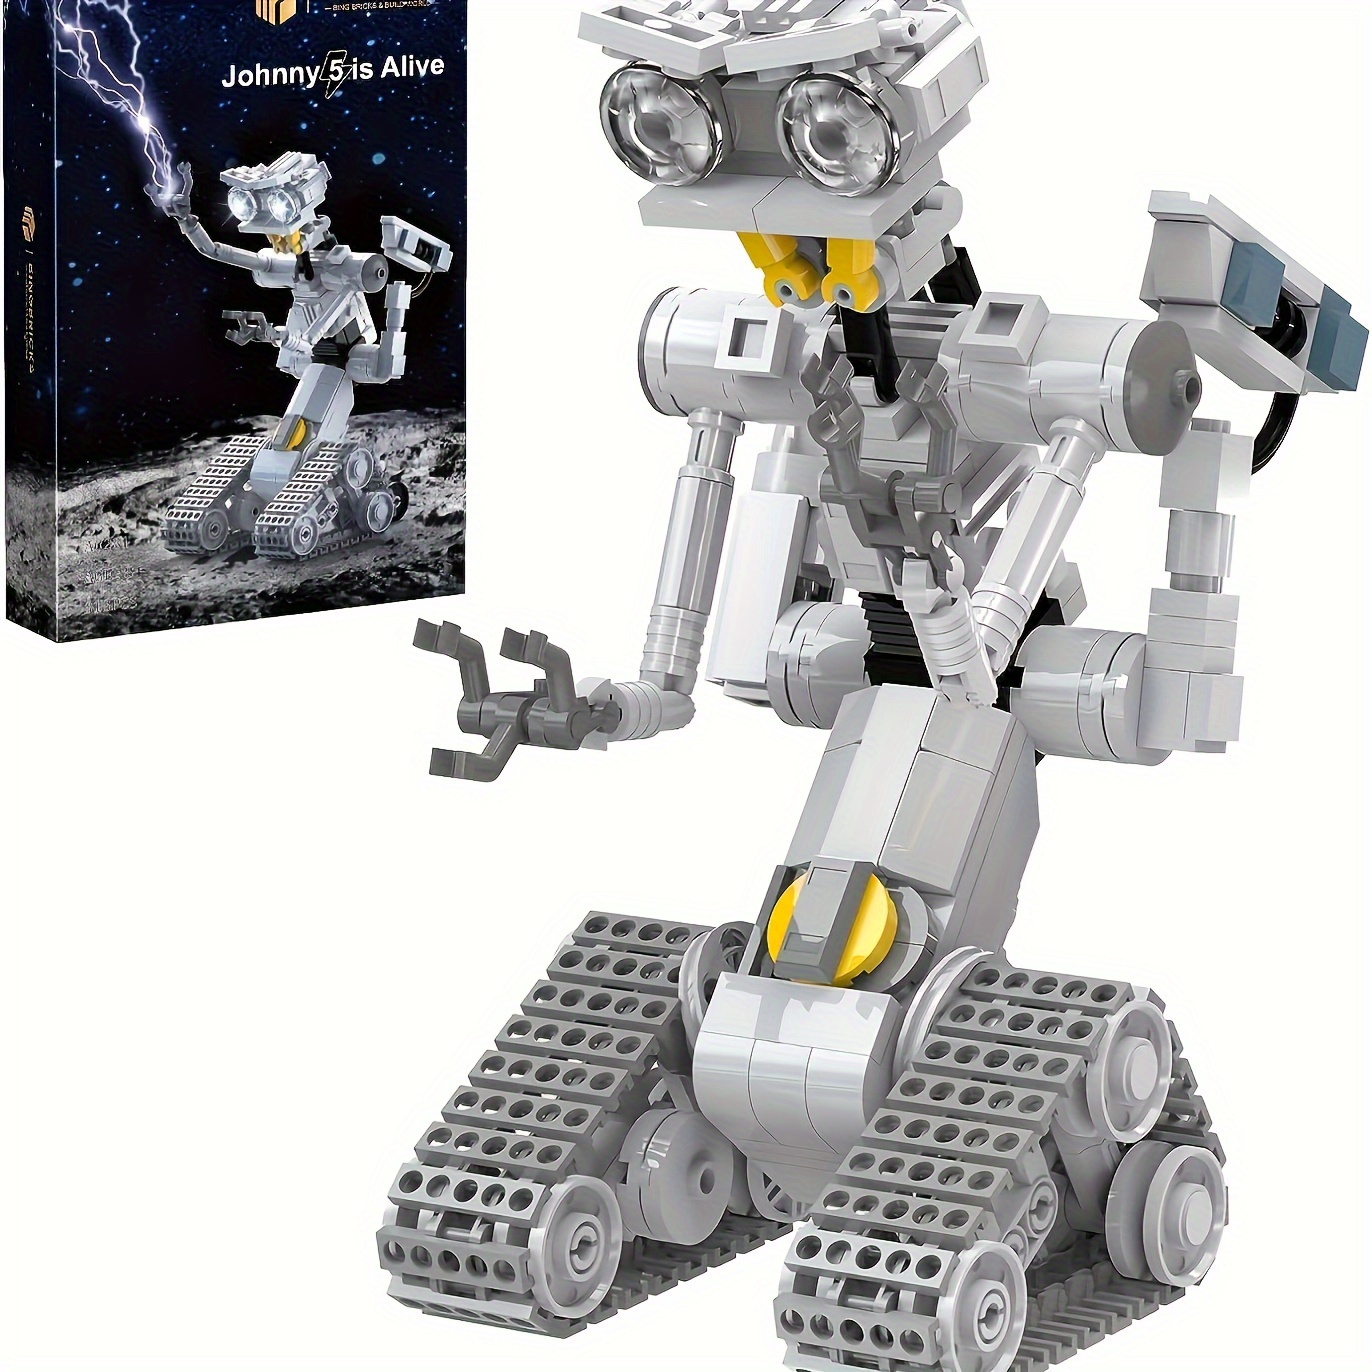 

Architectural Toy Set, Electromechanical Movie Circuit Robot Doll, Model Toy, Building Block, Suitable For Children Aged 6 And Above